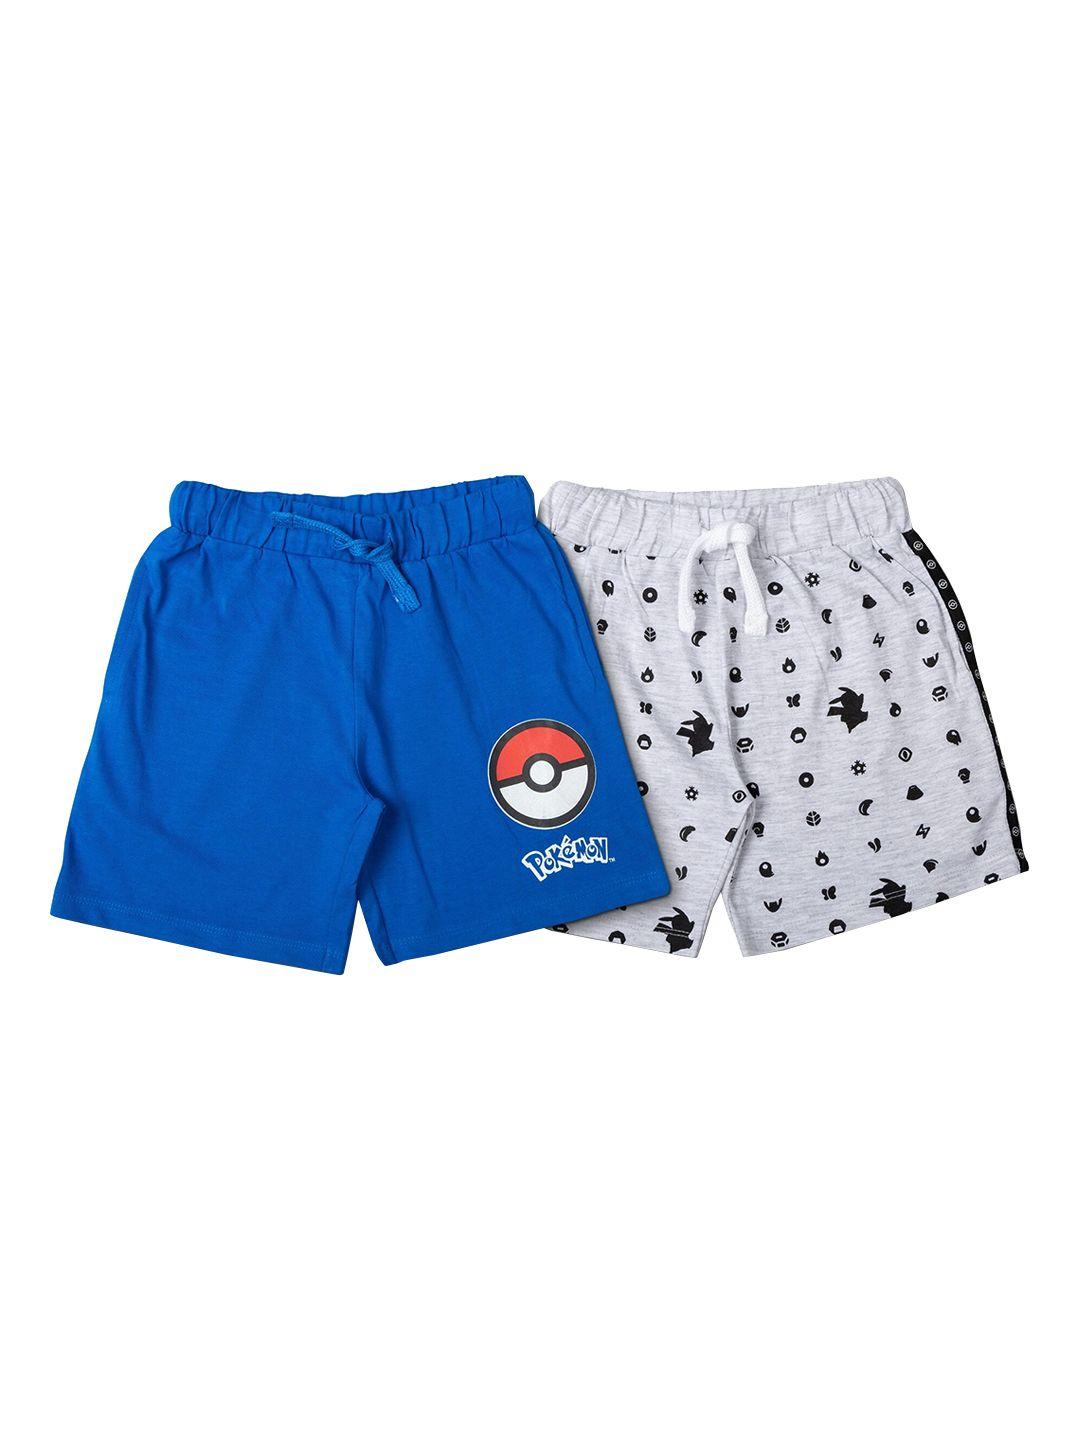 juscubs boys pack of 2 blue & grey printed pokemon pure cotton shorts